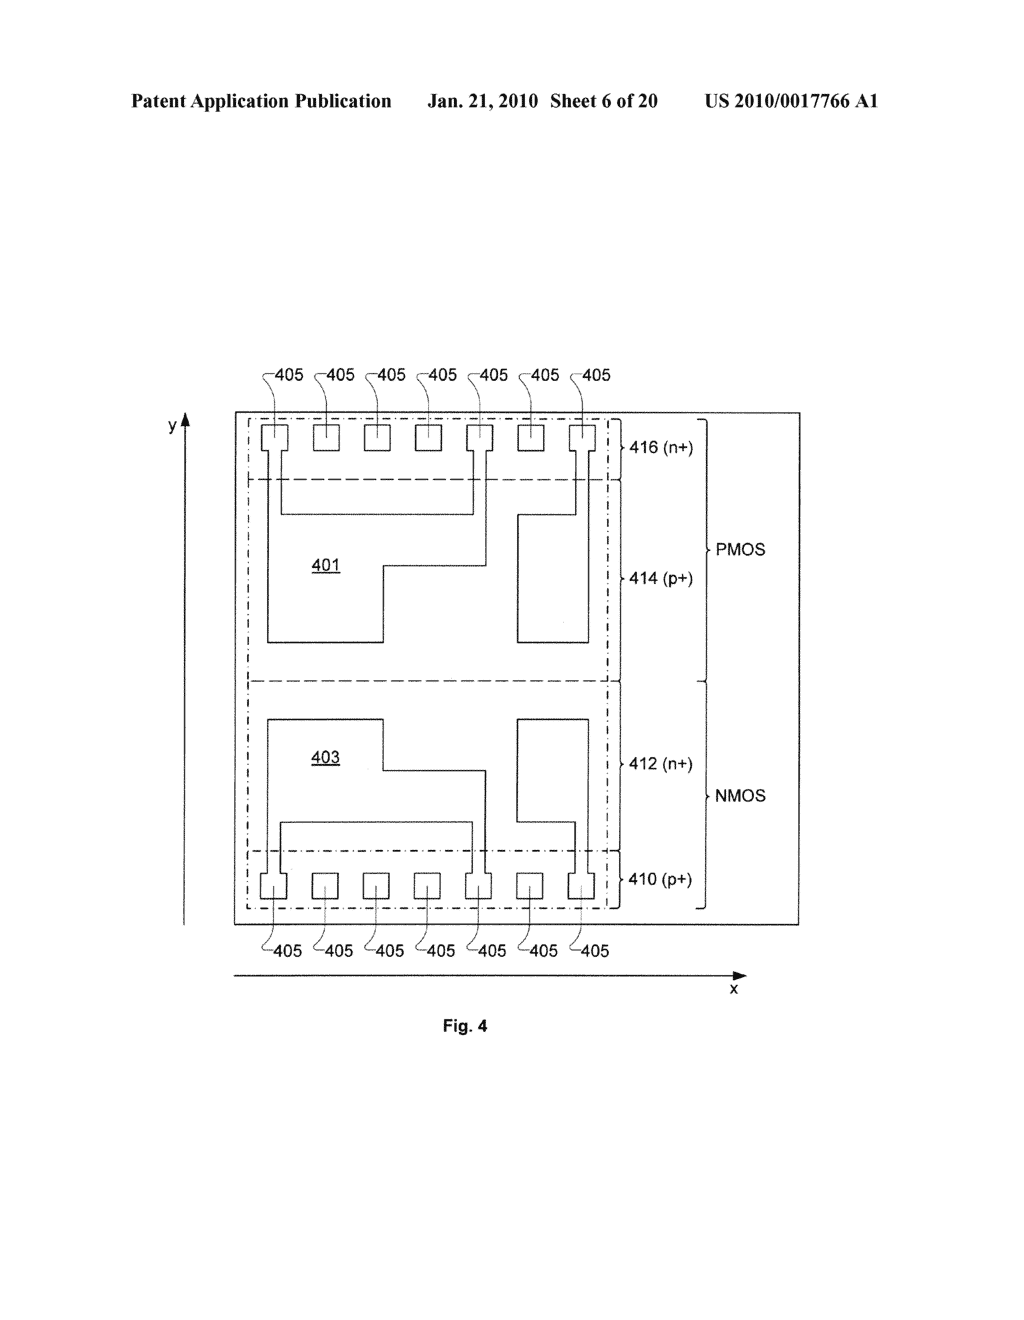 Semiconductor Device Layout Including Cell Layout Having Restricted Gate Electrode Level Layout with Linear Shaped Gate Electrode Layout Features Defined with Minimum End-to-End Spacing and At Least Eight Transistors - diagram, schematic, and image 07